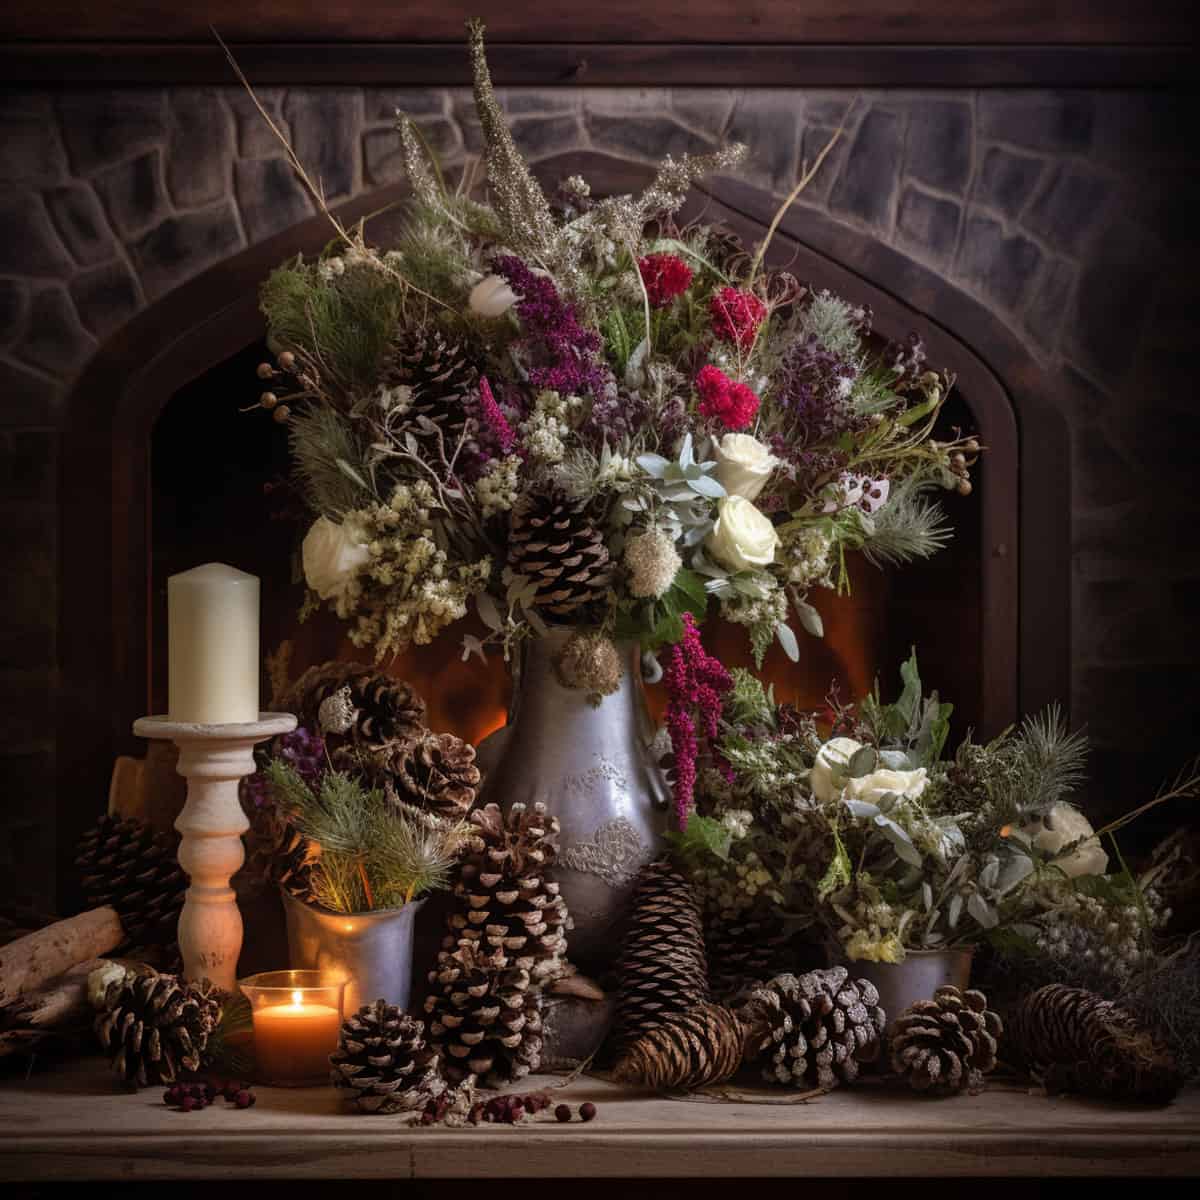 rustic winter retreat, arrangement with an assortment of wildflowers, and pine cones, whose varied textures for Christmas with festive Christmas backgrounds and mantels.